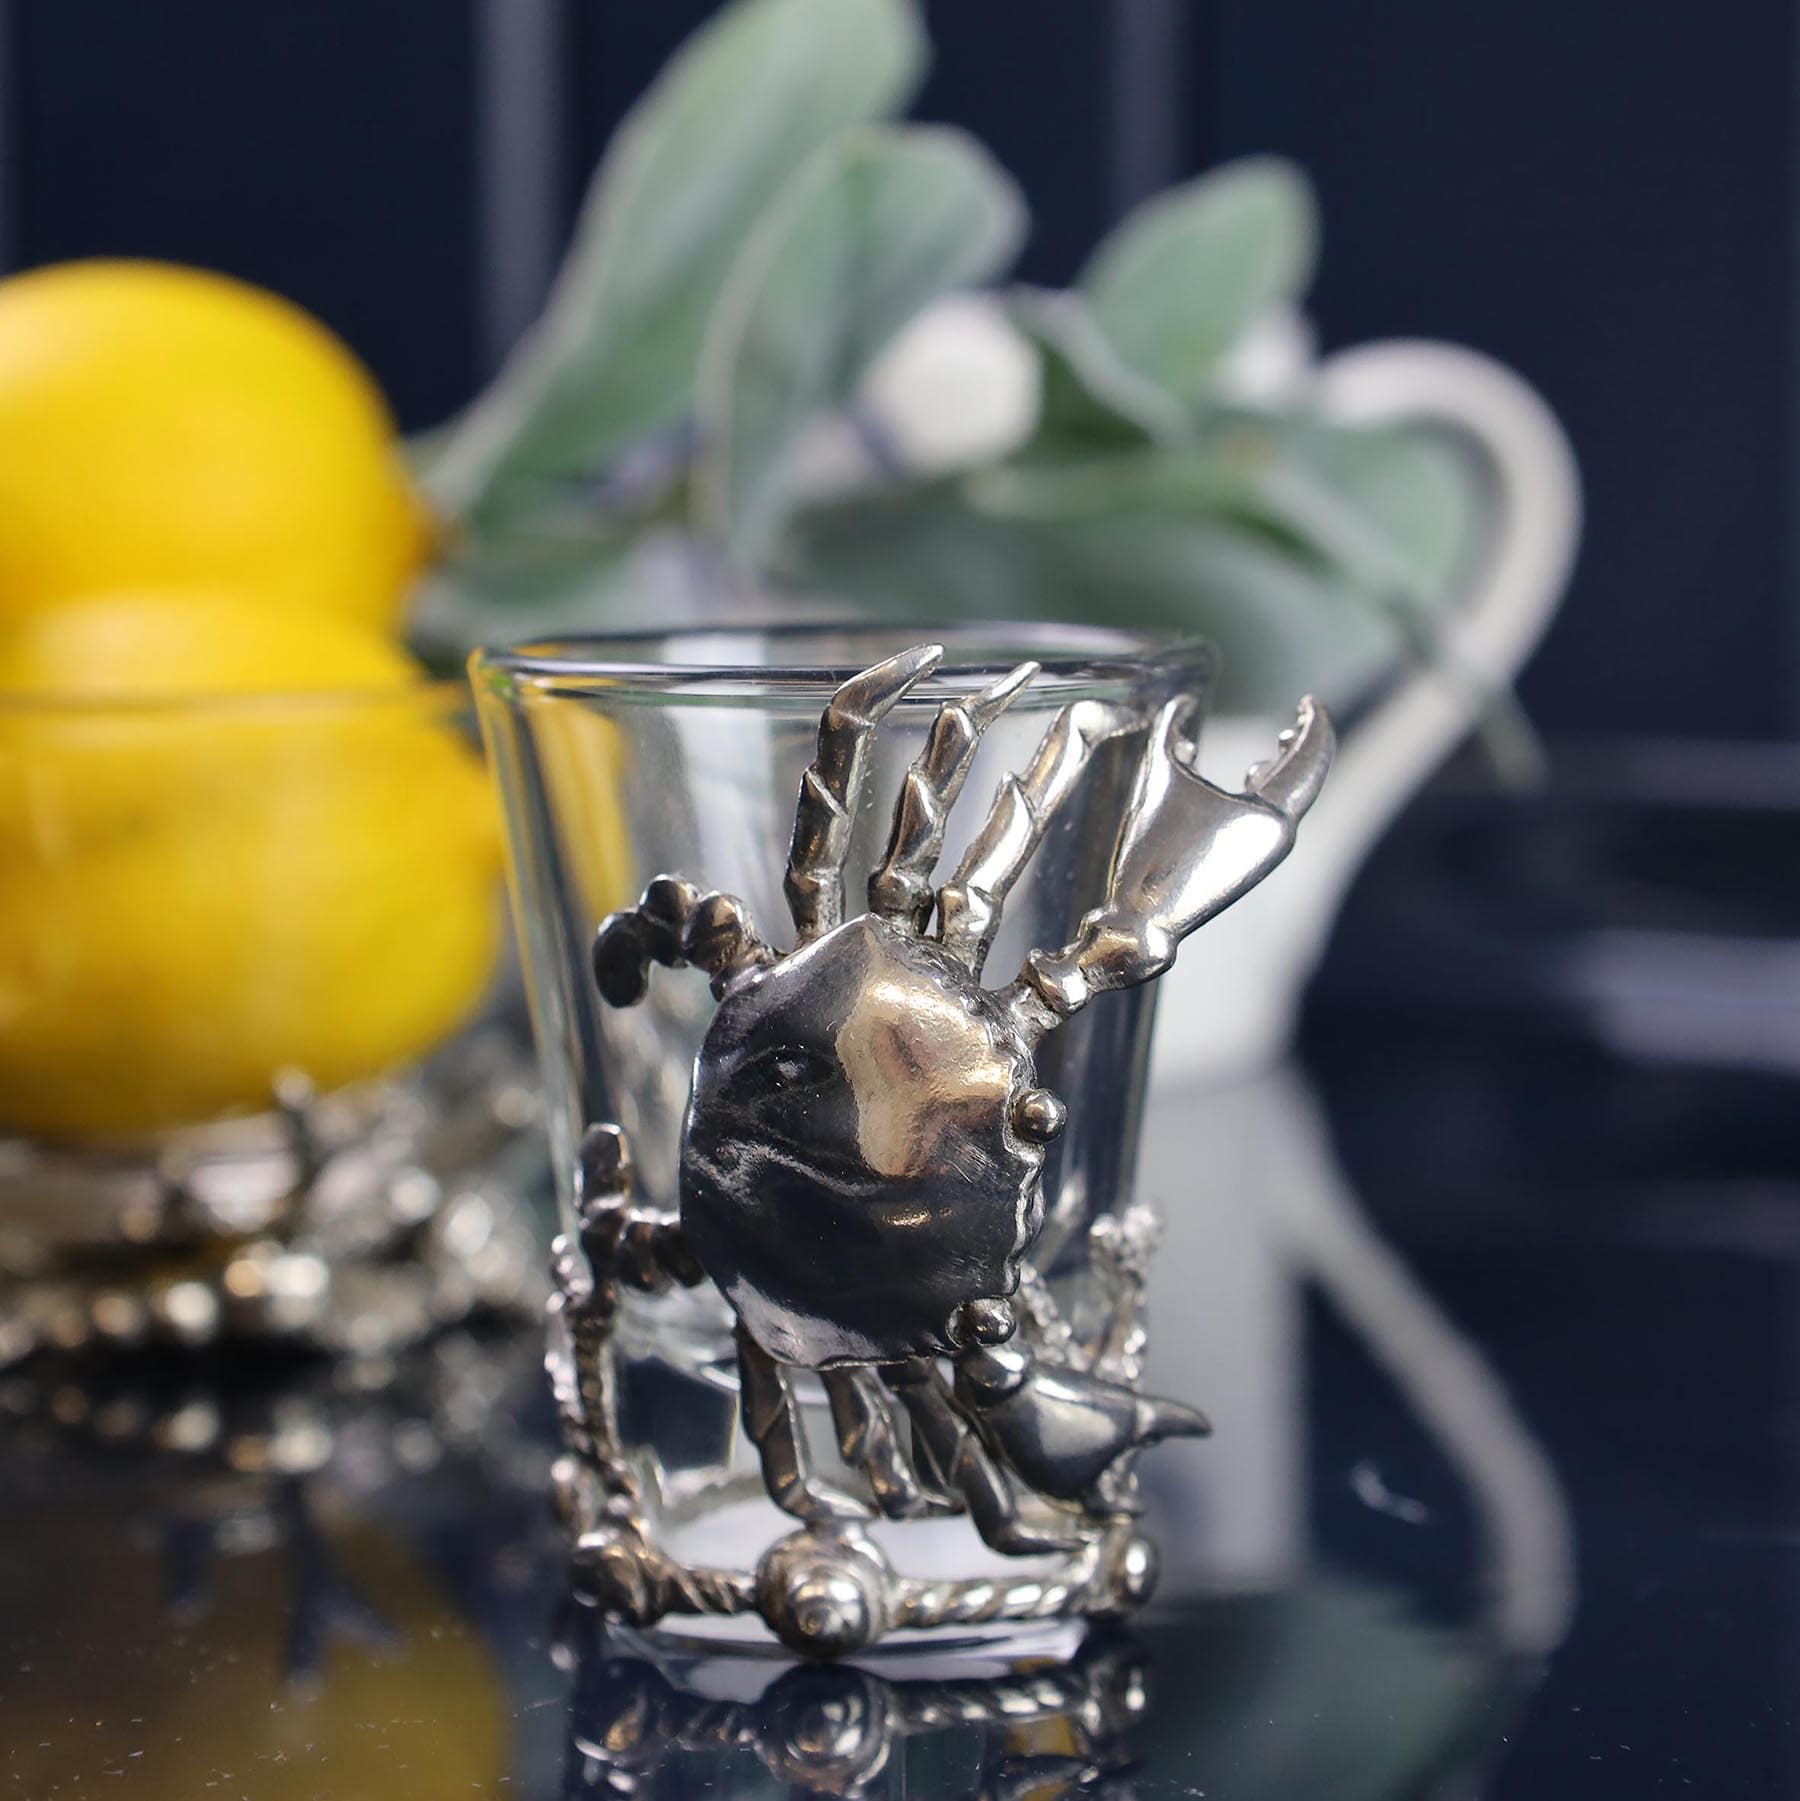 Pewter Crab Shot Glass on a mirror table in front of a bowl with lemons in